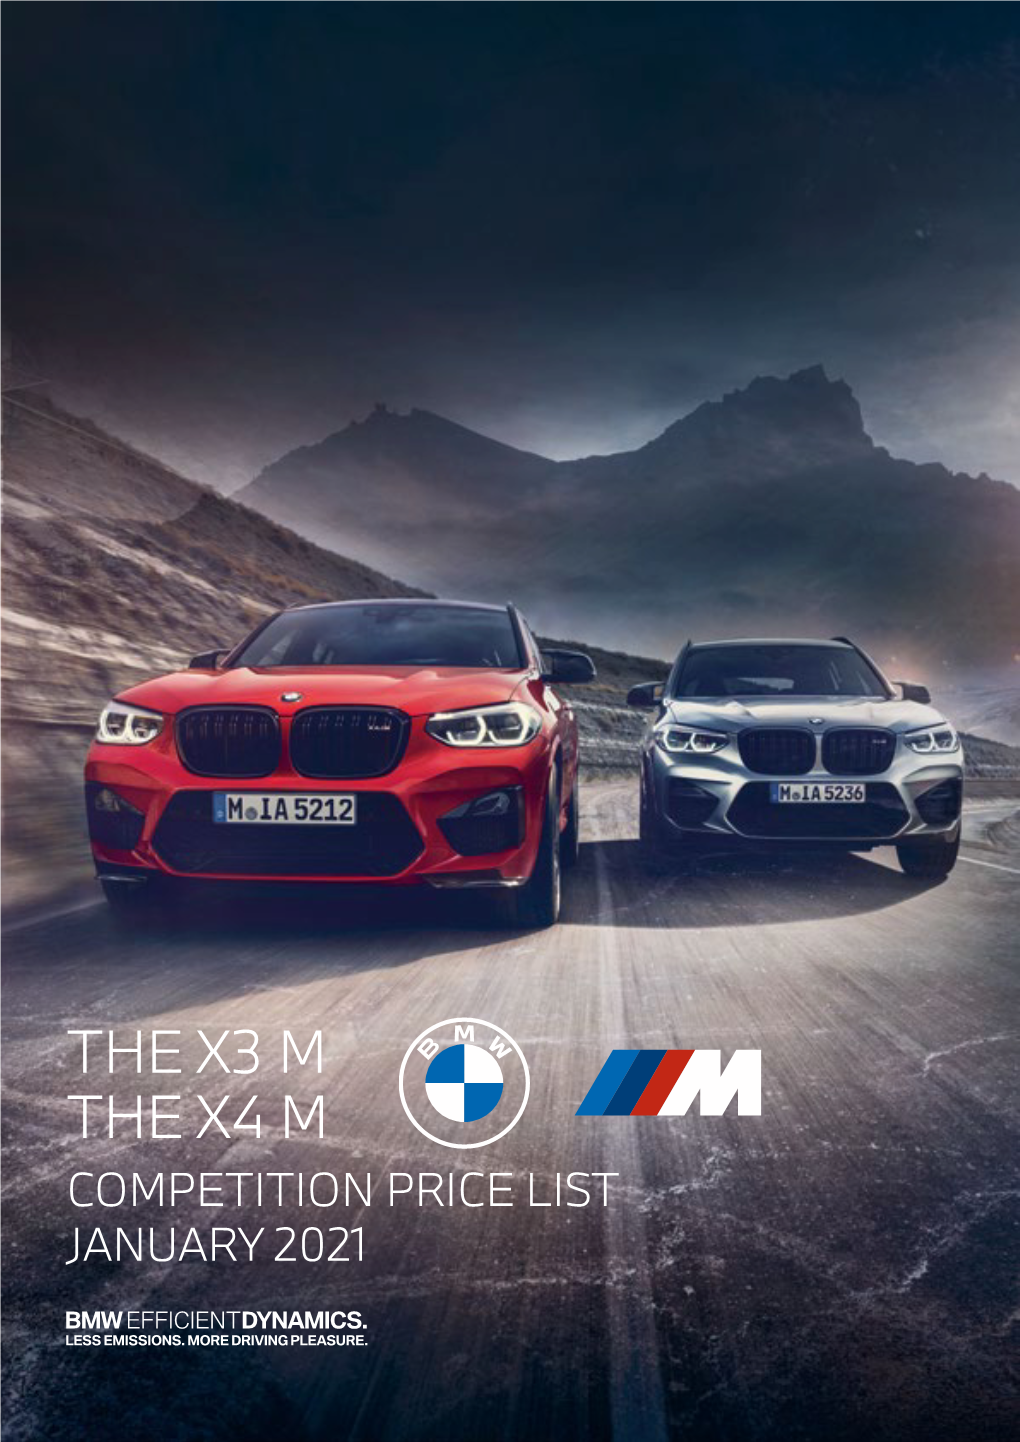 The X3 M the X4 M Competition Price List January 2021 the All-New X3 M Competition and X4 M Competition